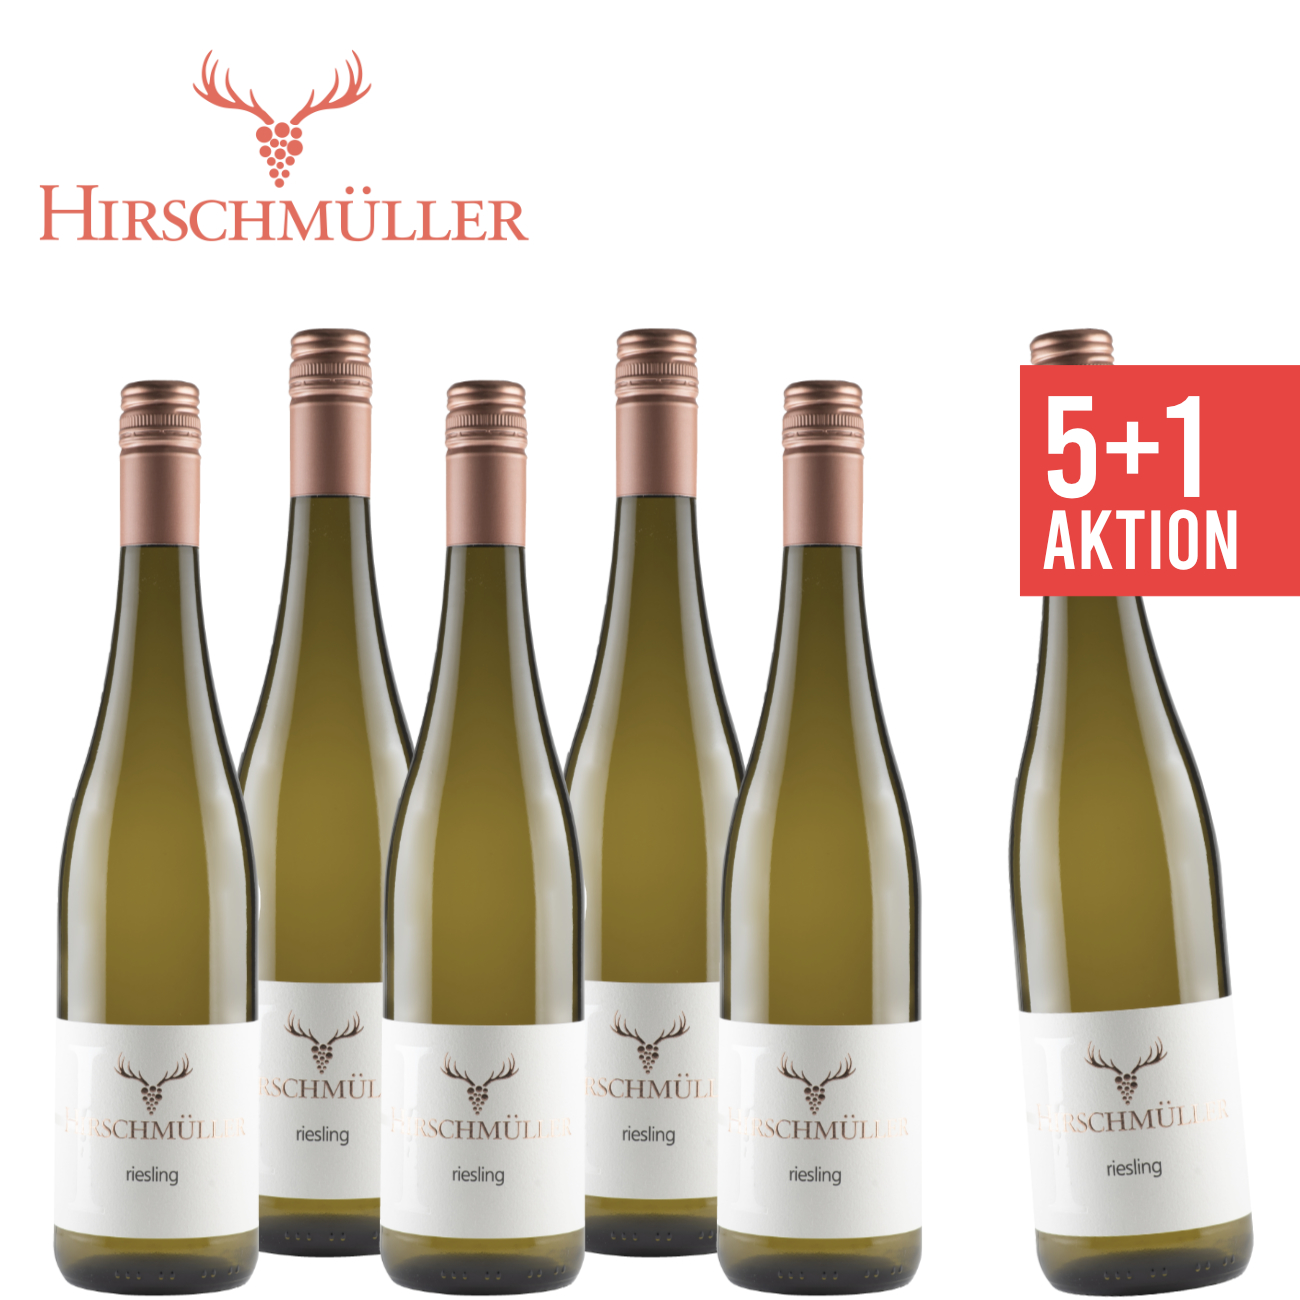 wein.plus find+buy: The | wines members our wein.plus of find+buy